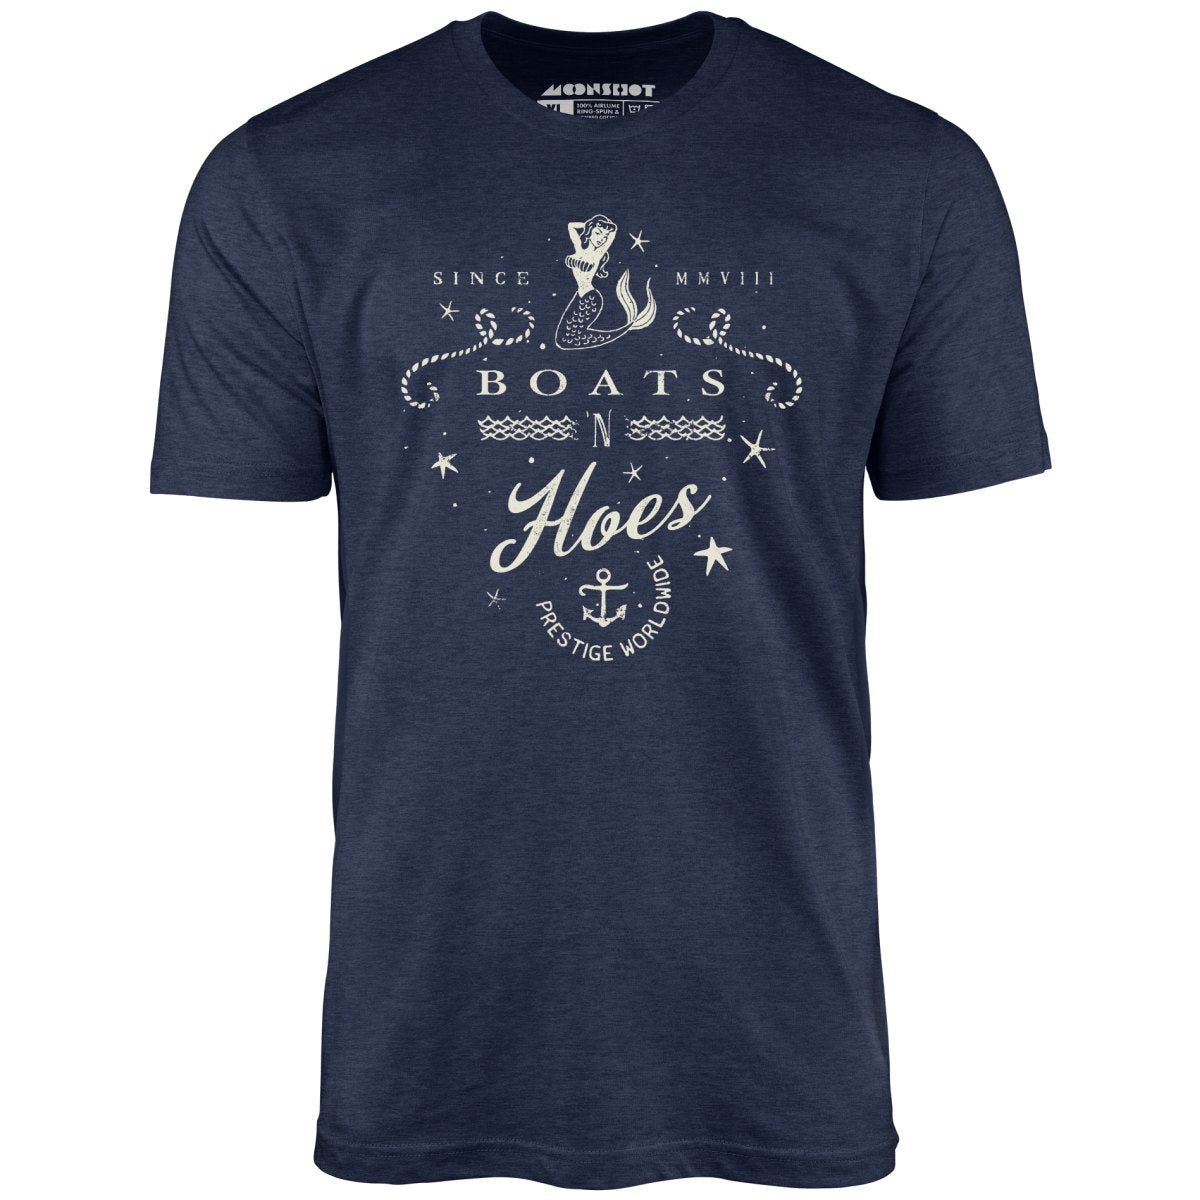 Boats n Hoes - Unisex T-Shirt